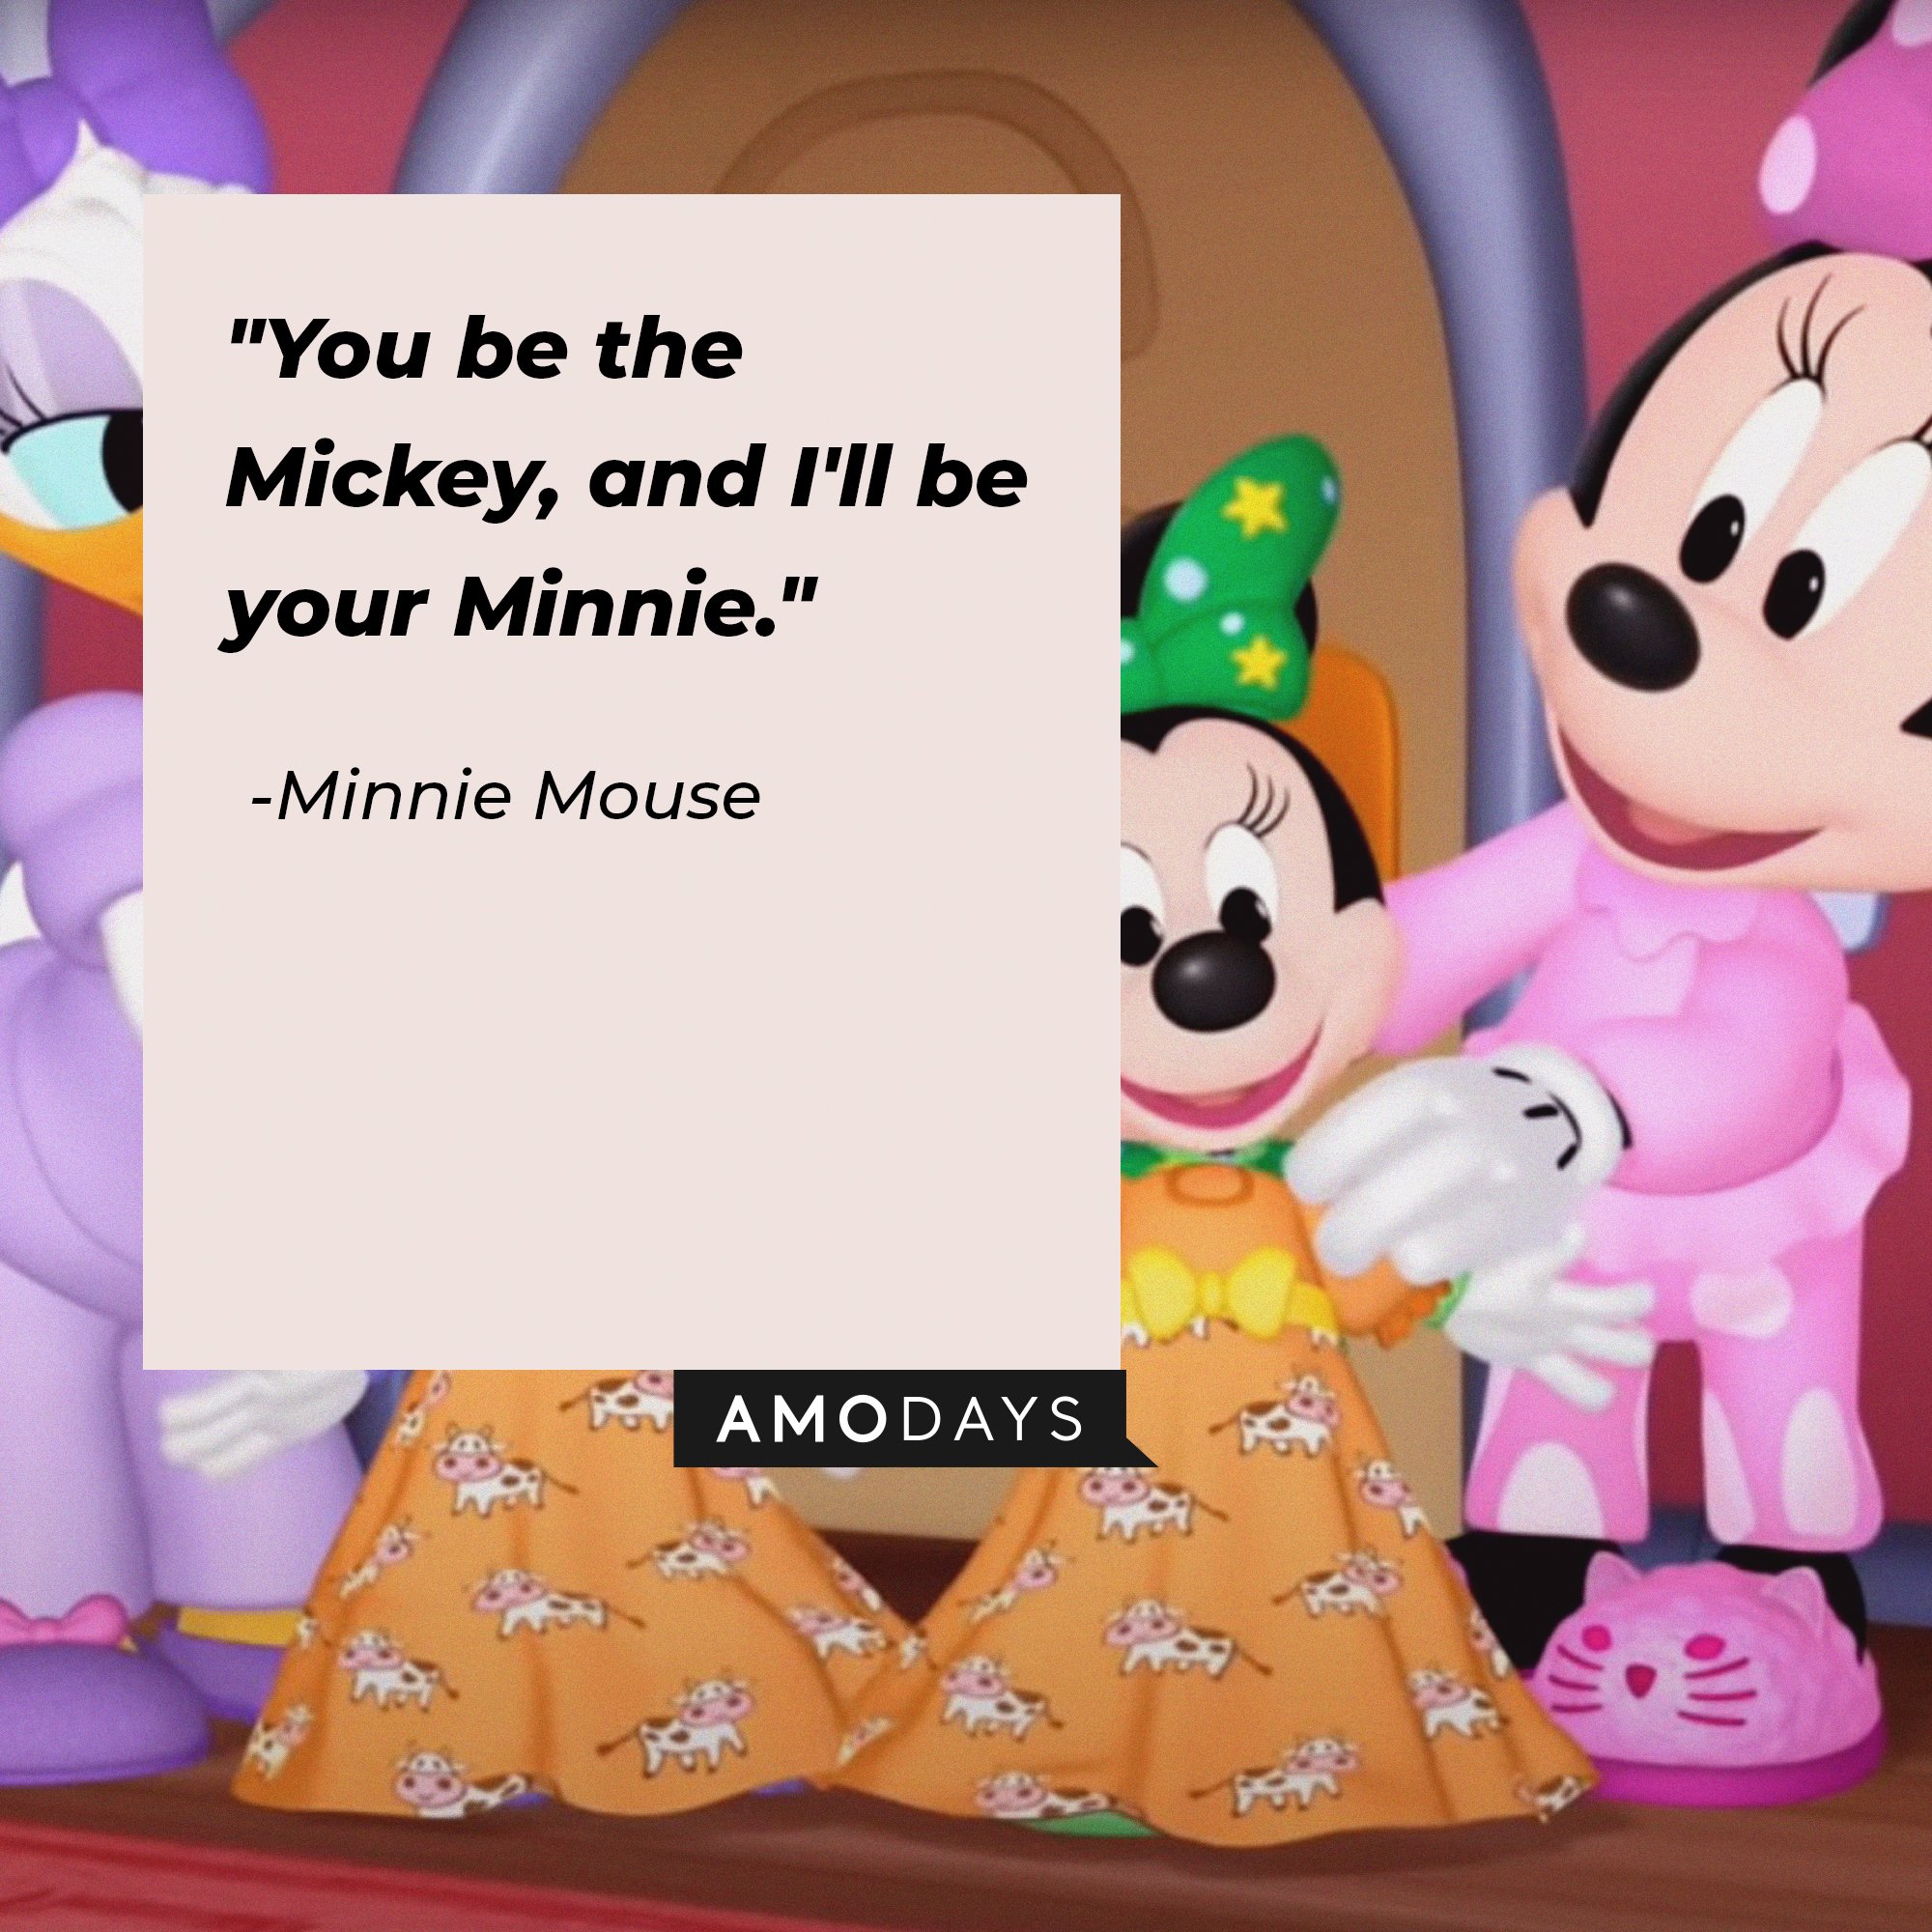 Minnie Mouse’s quote: "You be the Mickey, and I'll be your Minnie." | Image: AmoDays